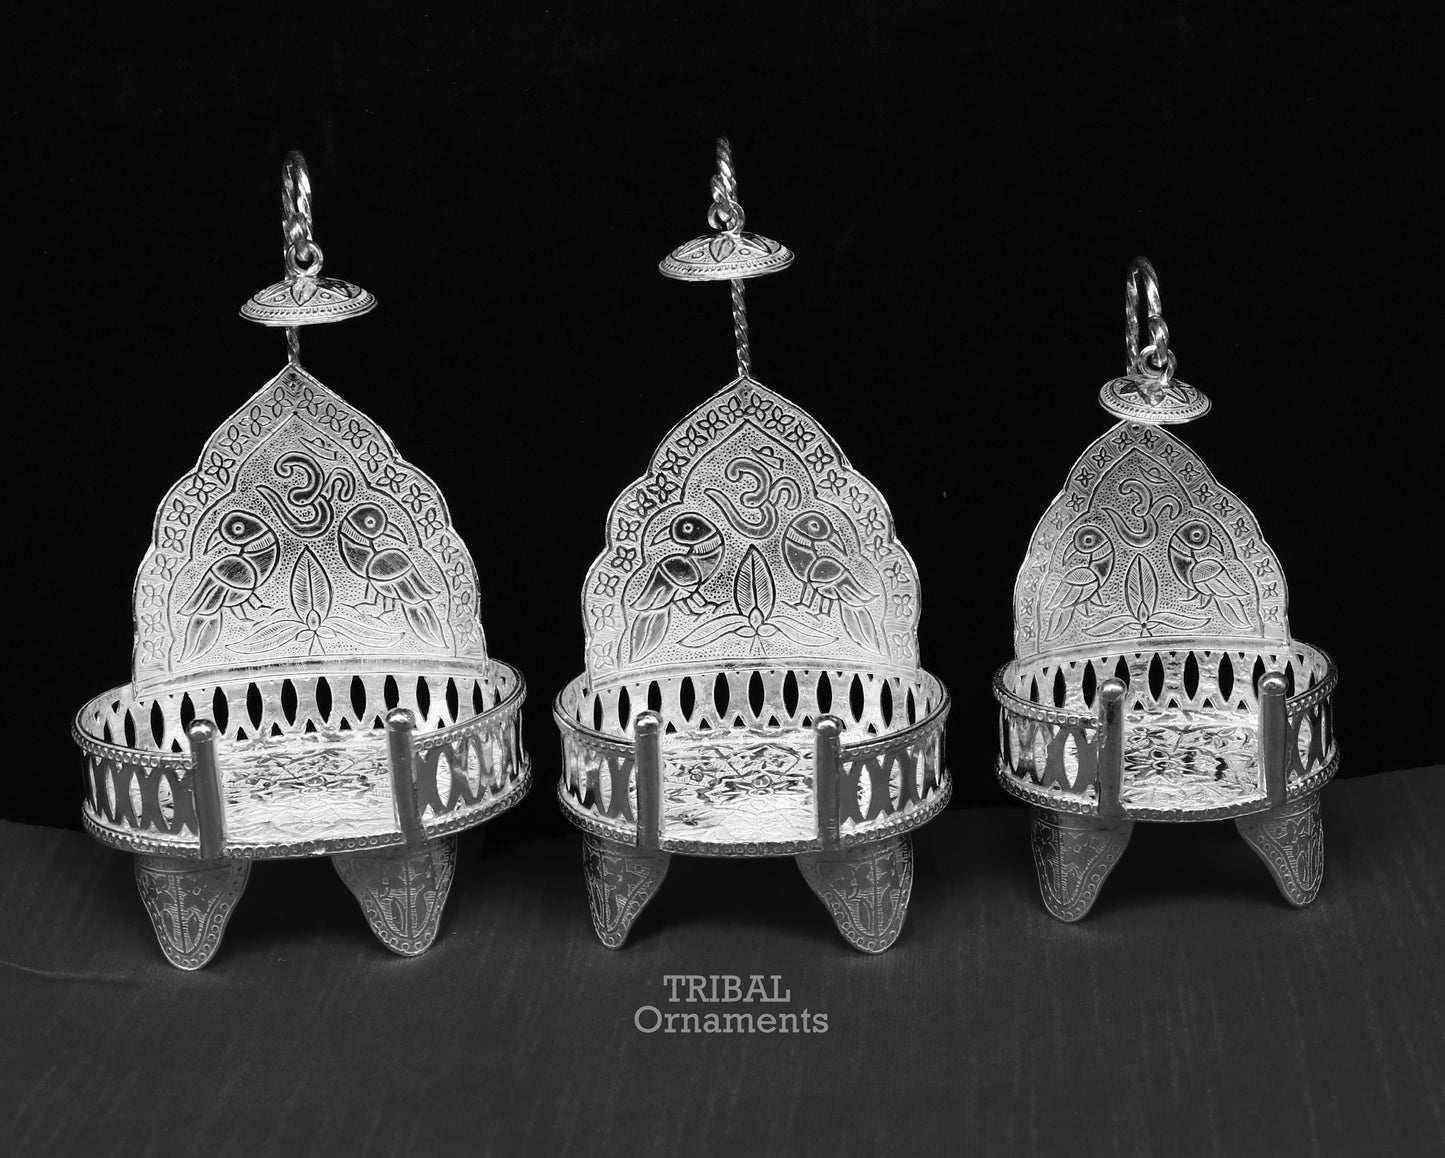 925 sterling silver solid Singhasan, singhasan idol god throne, god statue's stand chair, temple puja article best collectible gift su796 - TRIBAL ORNAMENTS